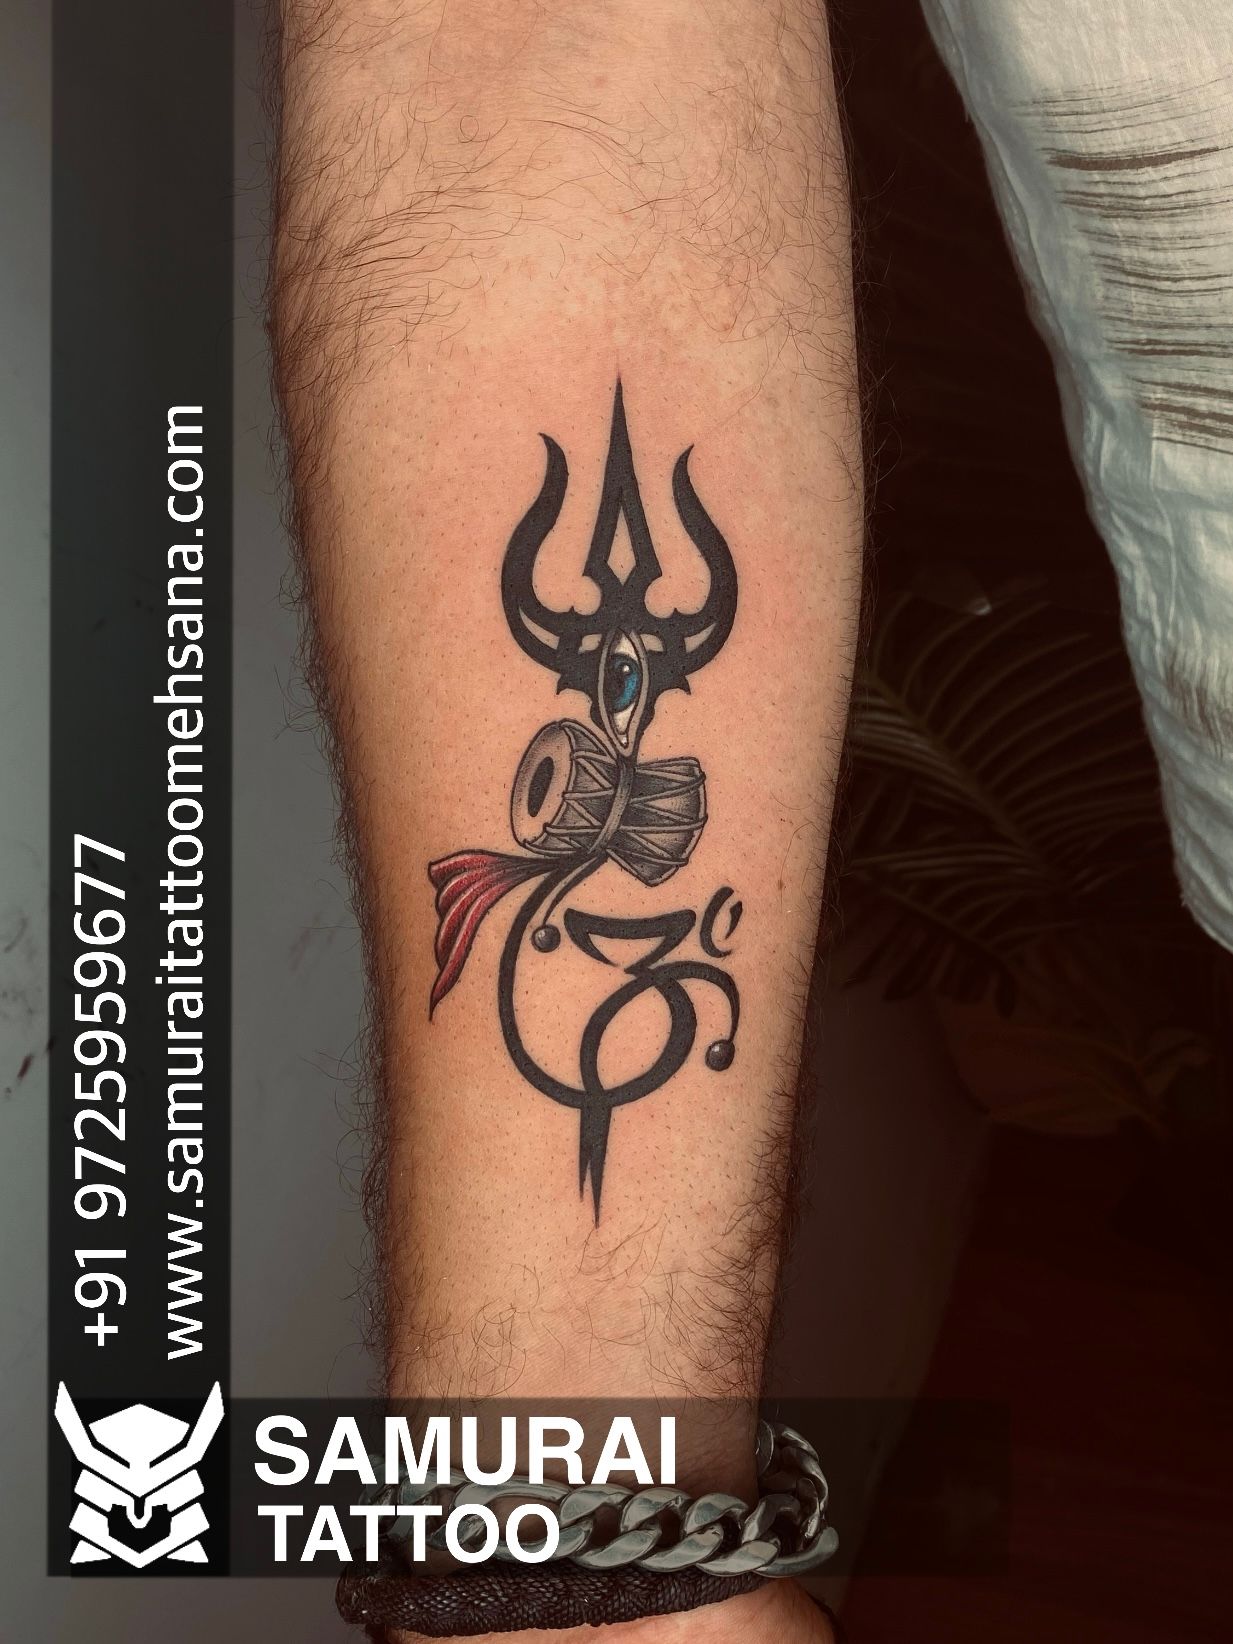 trishul tattoo with damroo and Rudraksh by Samarveera2008 on DeviantArt